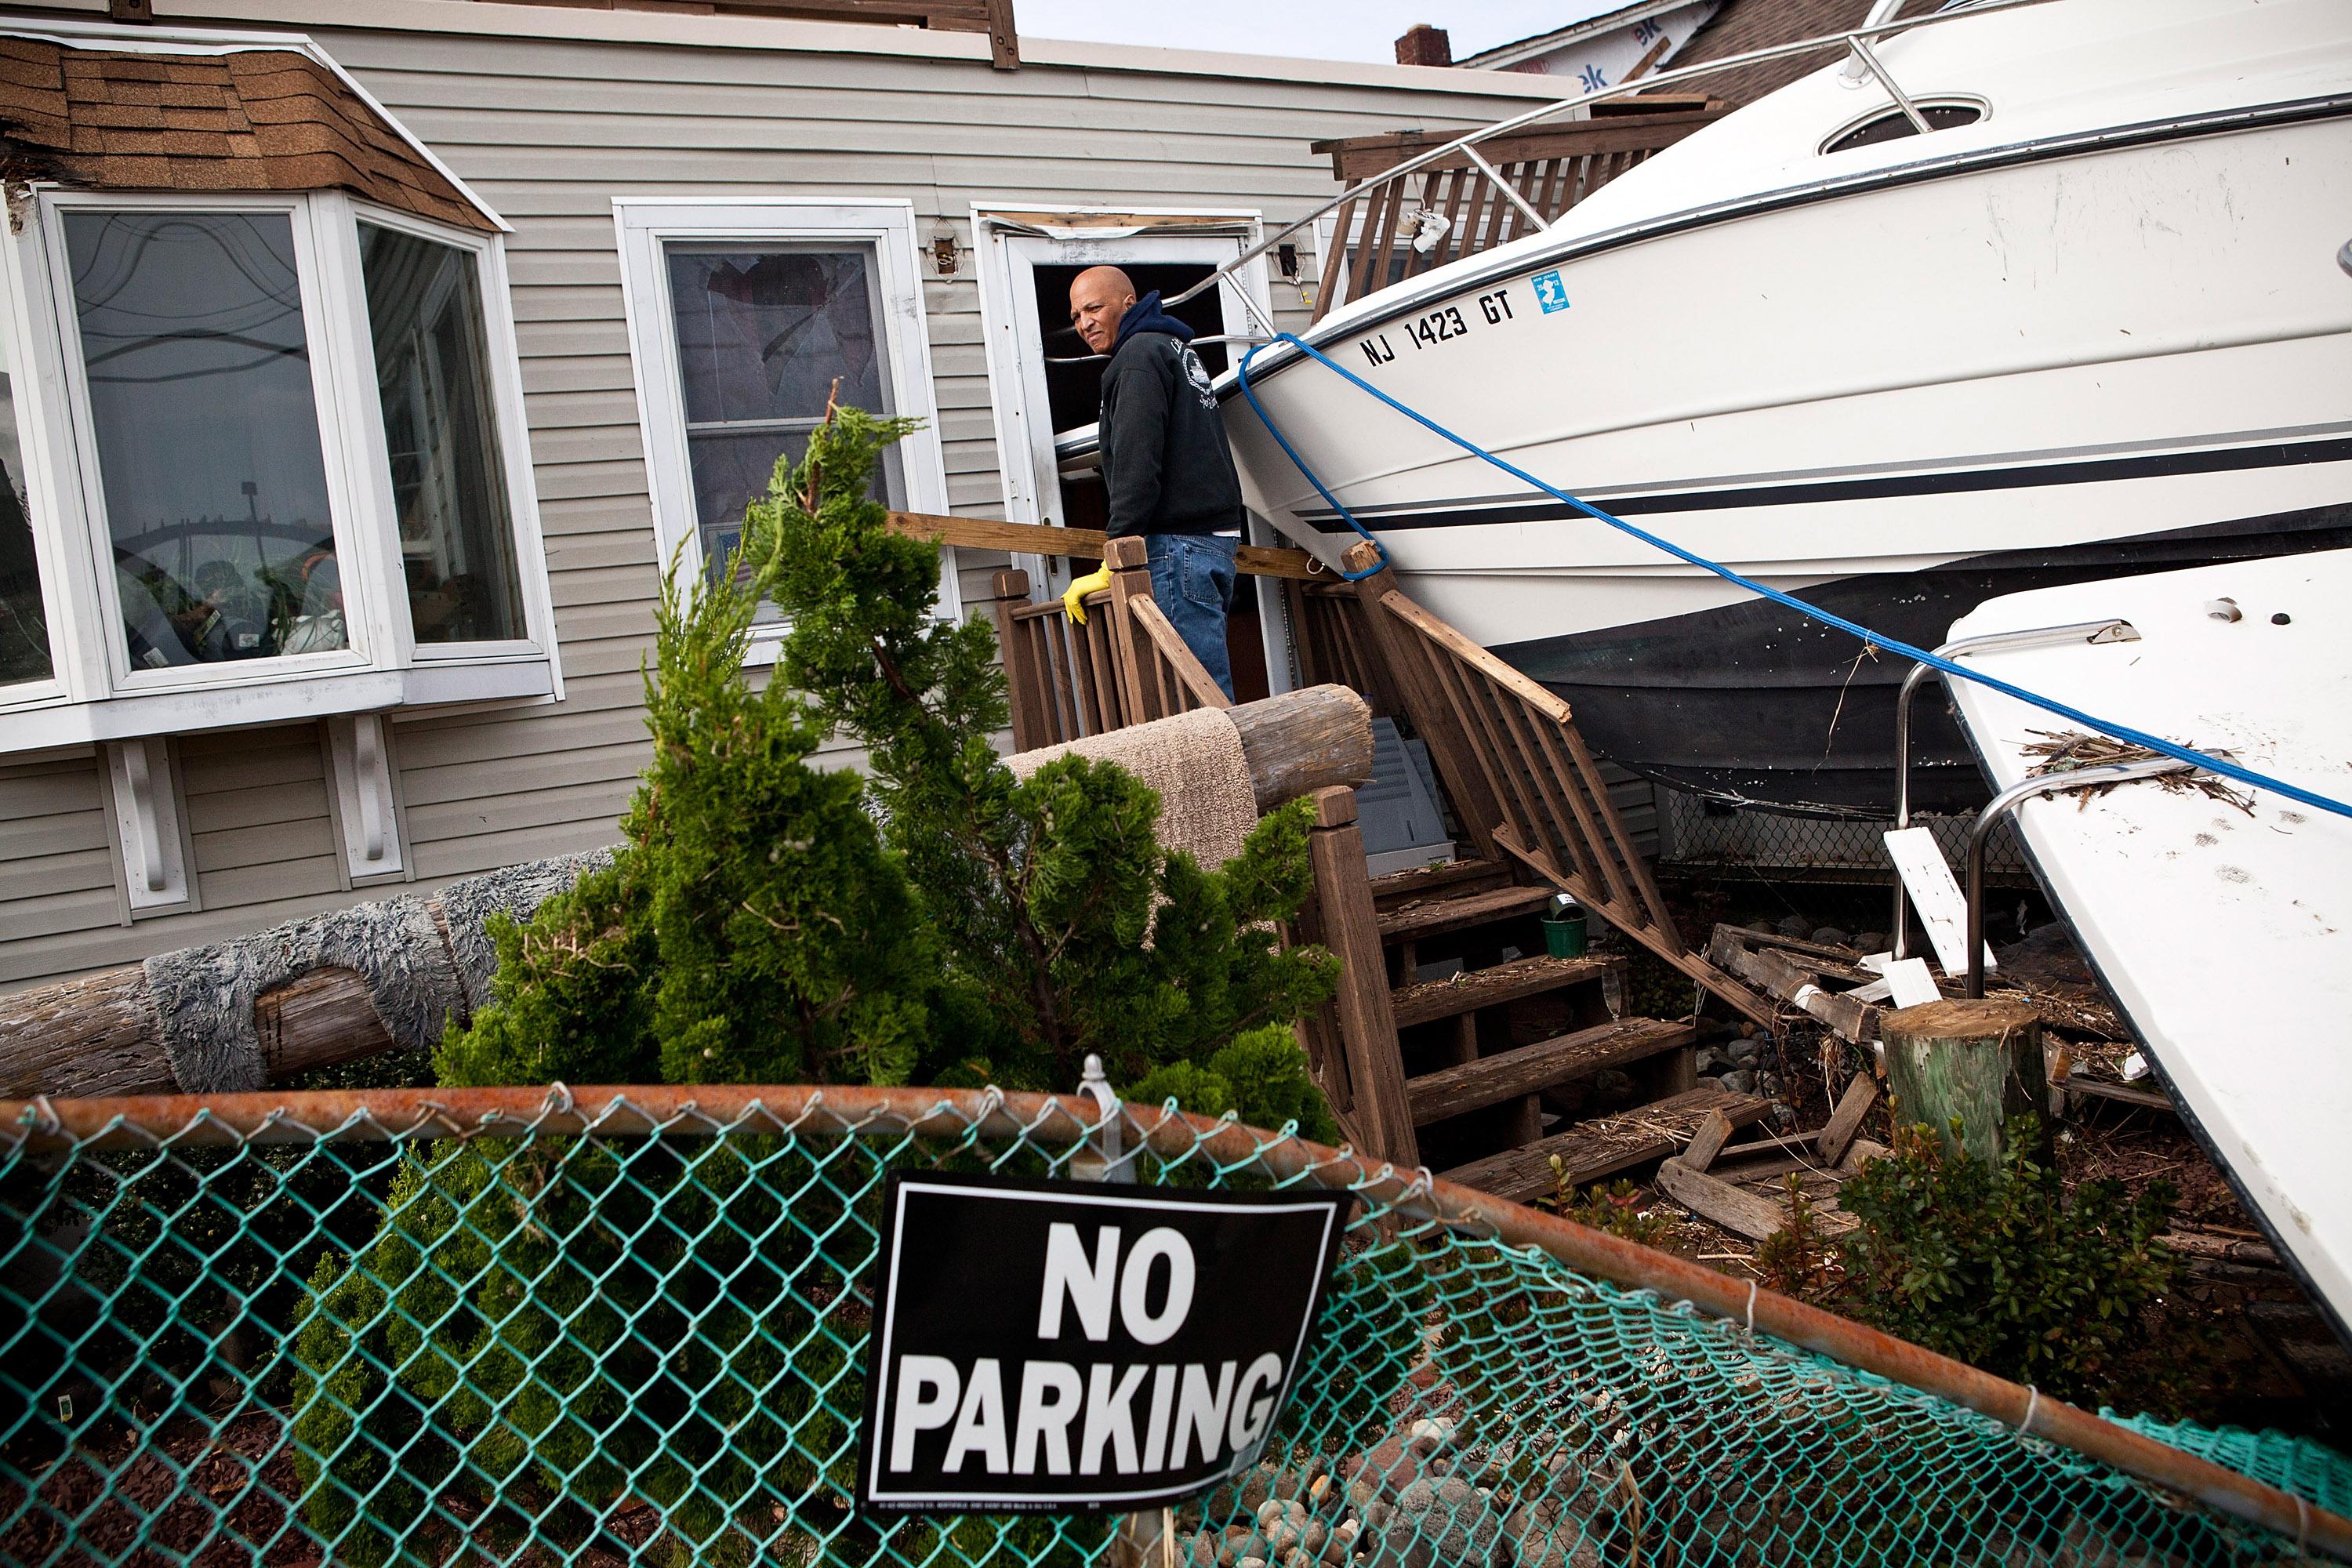 Clifford Seay helps his girlfriend, Regina Yahara-Splain, clean out her home, which was damaged by Superstorm Sandy, on November 1, 2012 in Highlands, New Jersey.